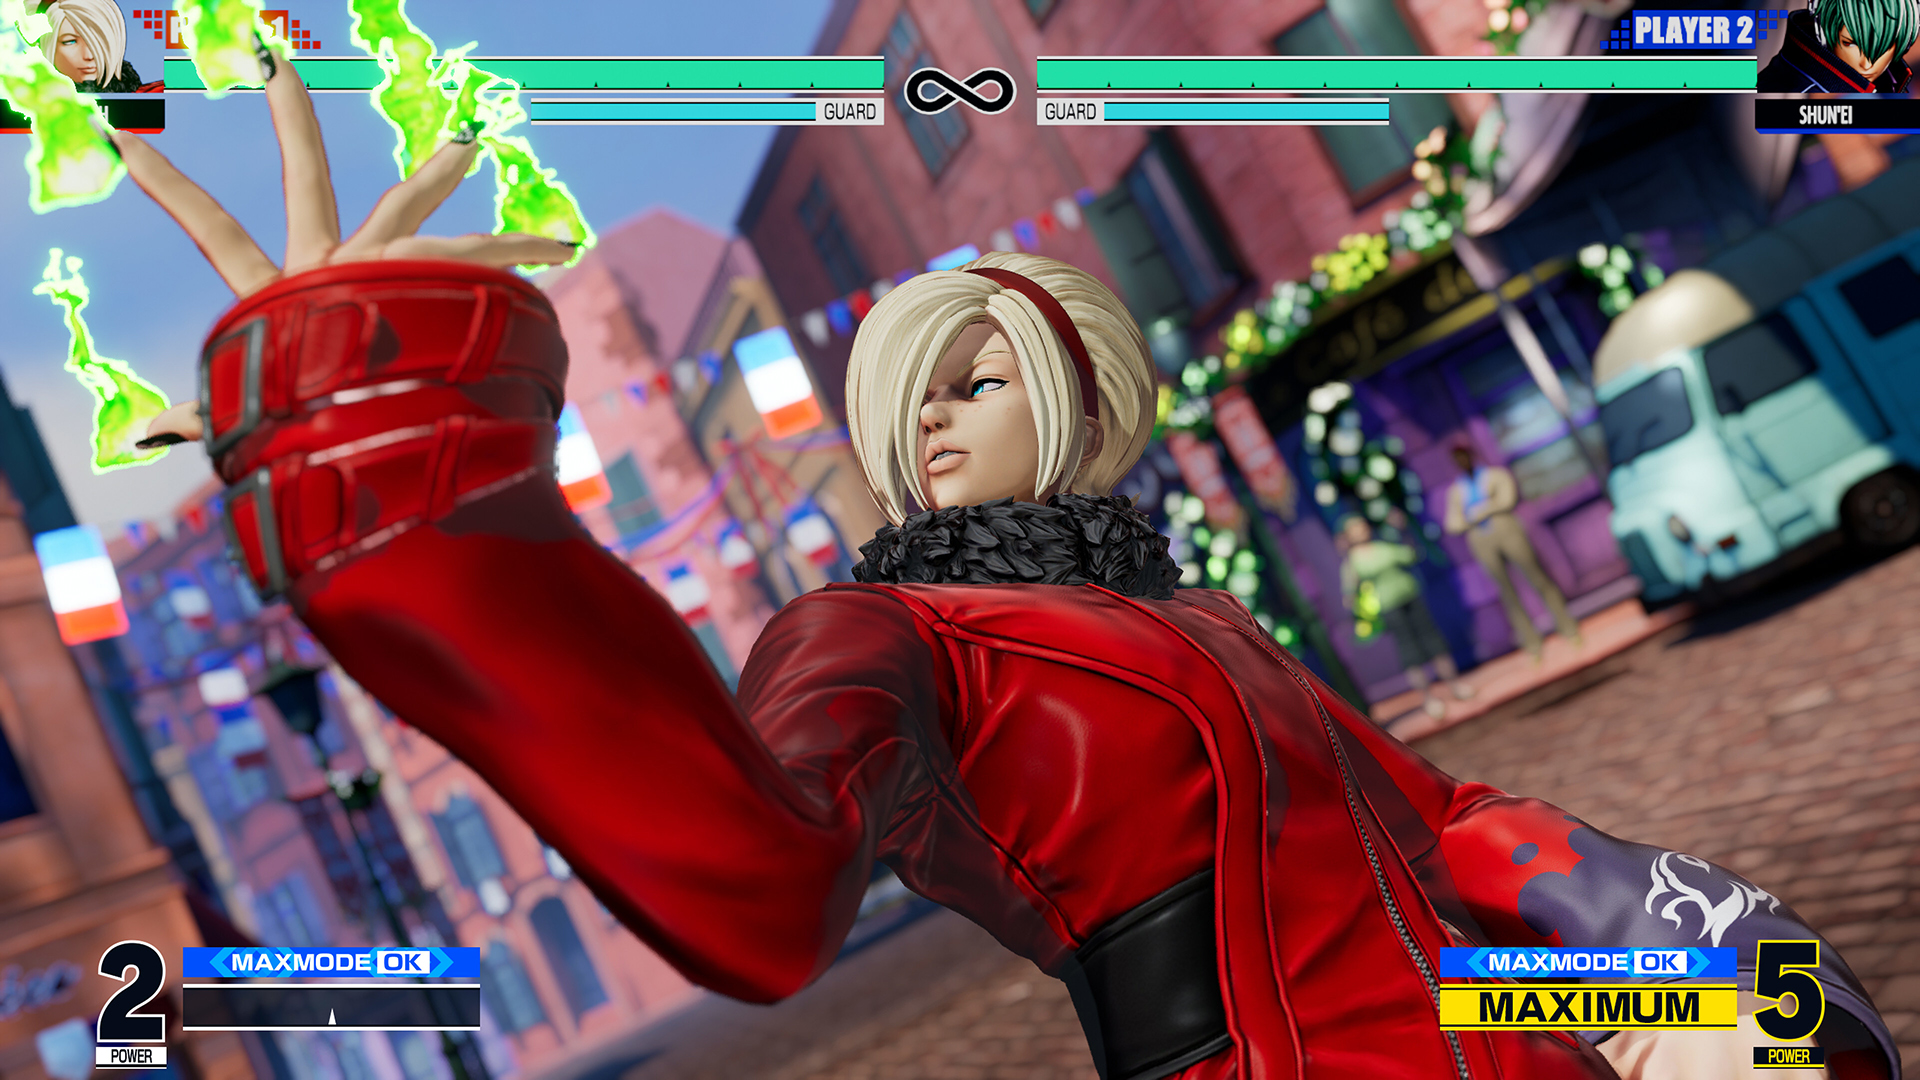 Jogo The King of Fighters XV para Xbox Series X